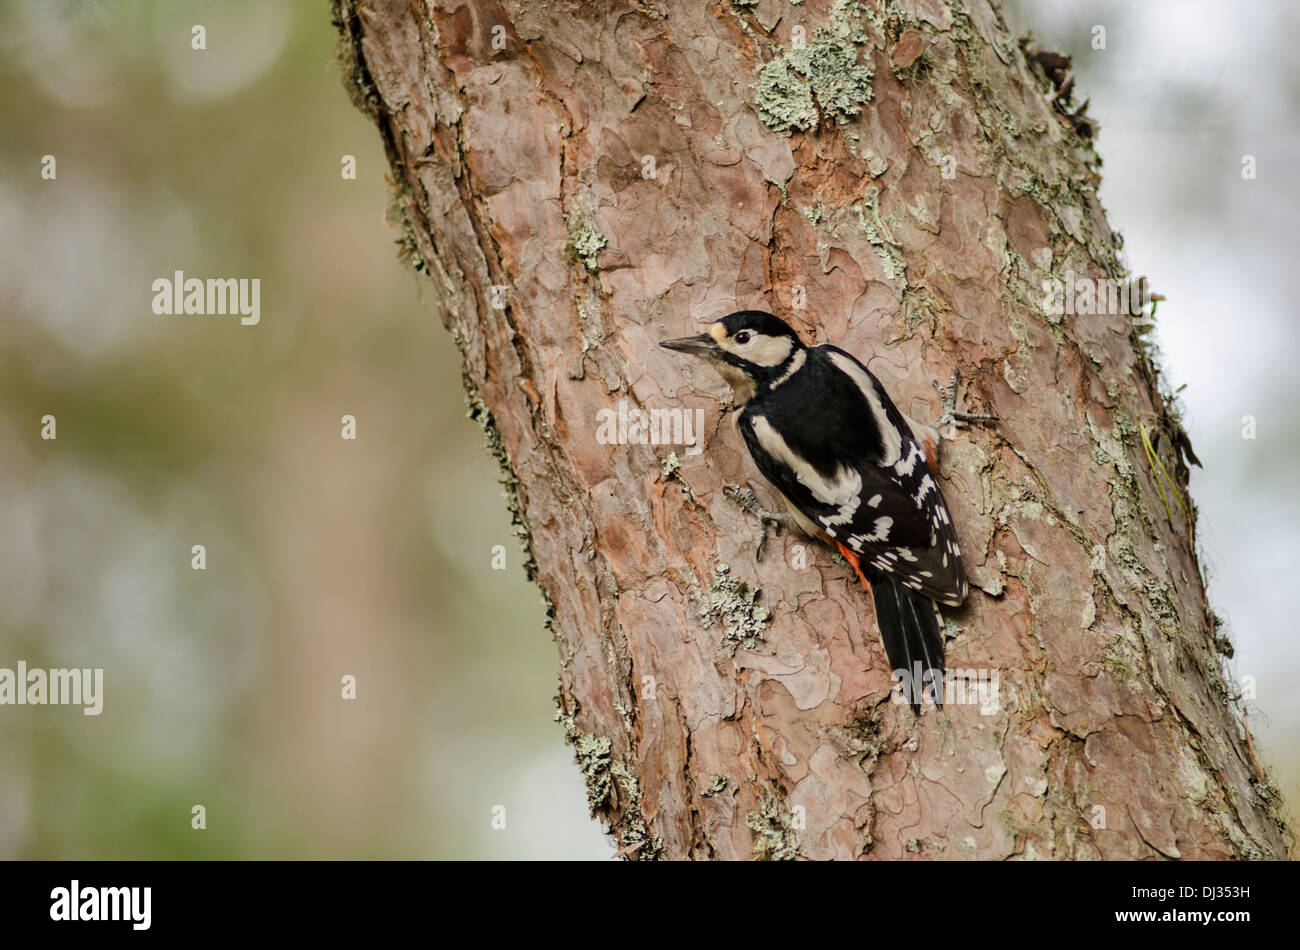 Bird on trunk of tree in landscape view. Stock Photo